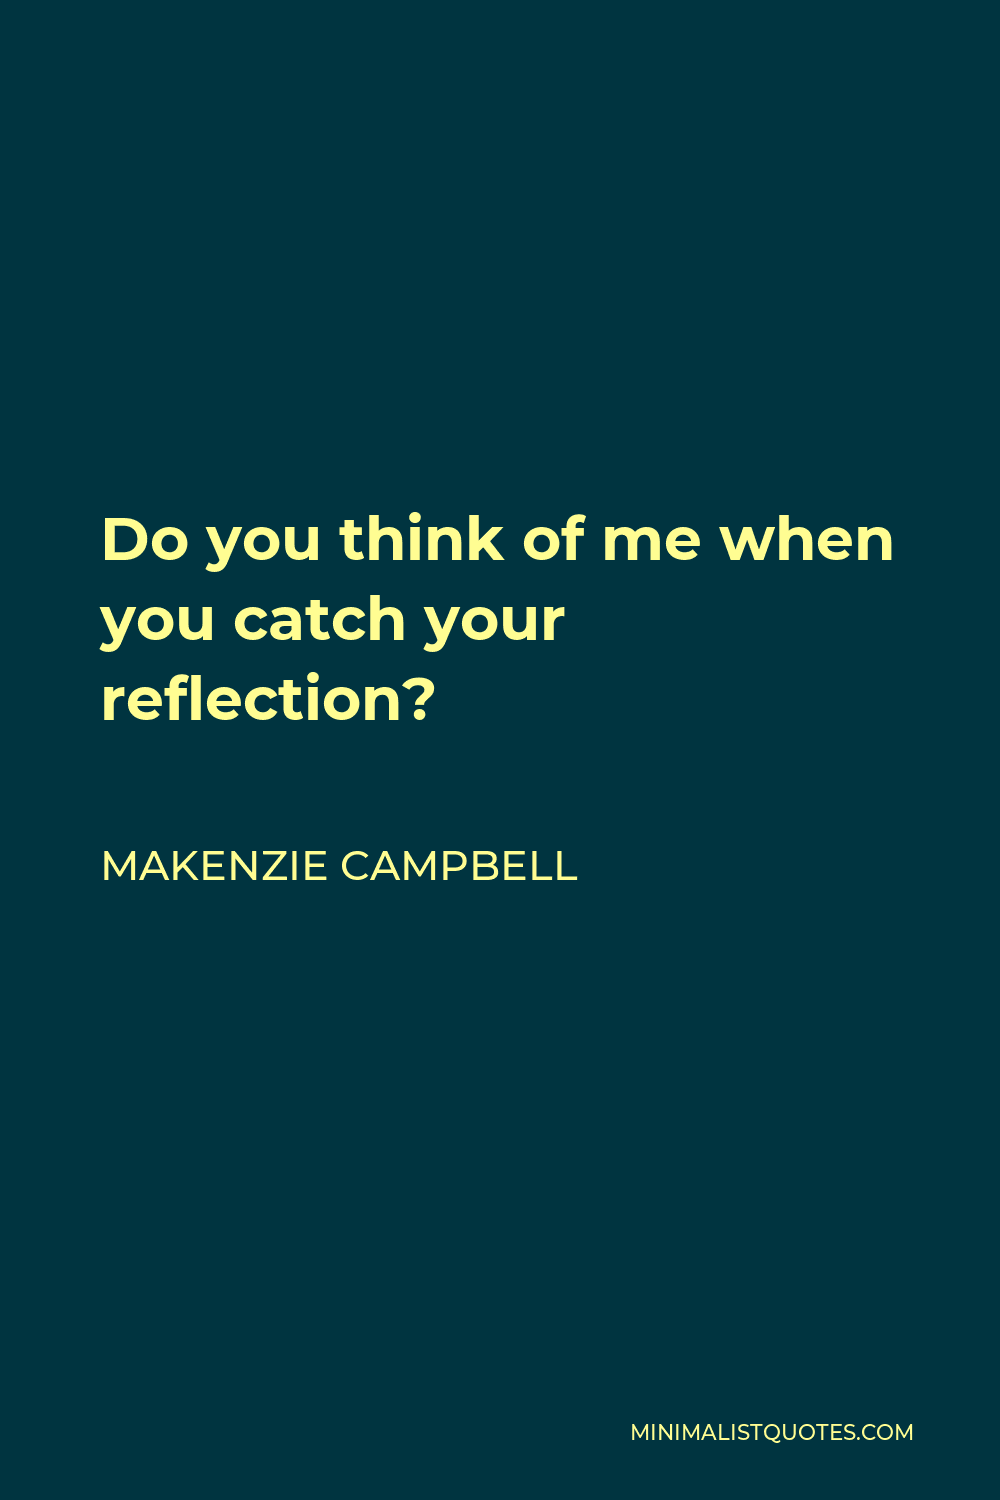 Makenzie Campbell Quote - Do you think of me when you catch your reflection?